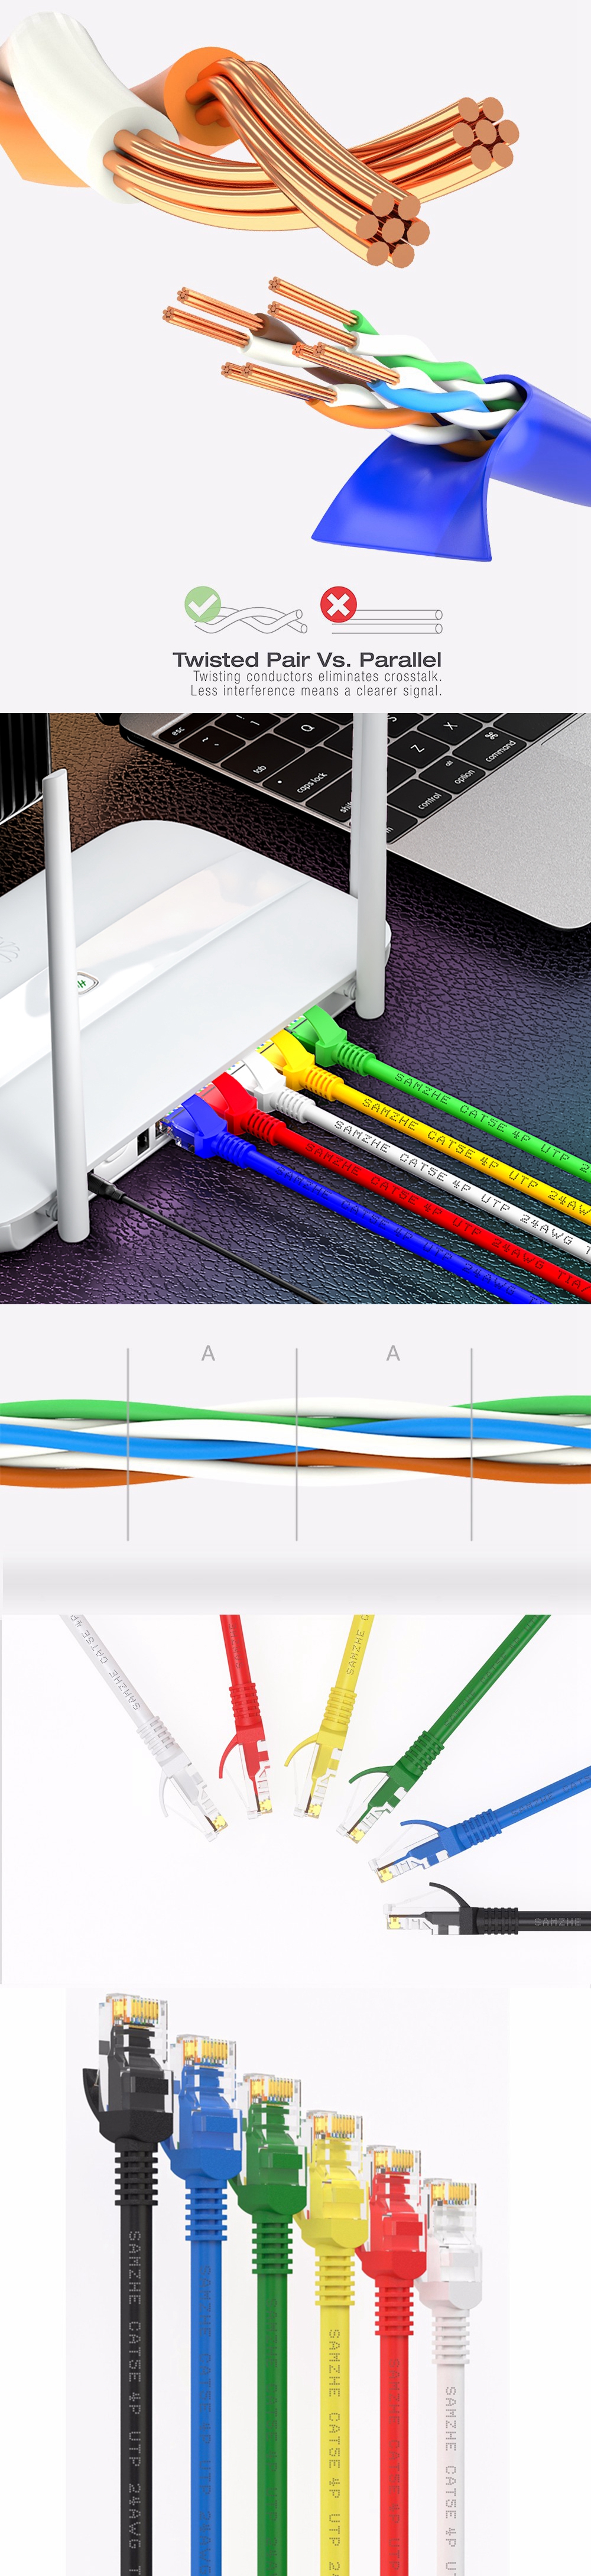 SAMZHE ZW-01 0.5m / 2m / 5m Networking Cable RJ45 Cat 5 Ethernet Cable Patch Cord LAN Networking Cable Adapter